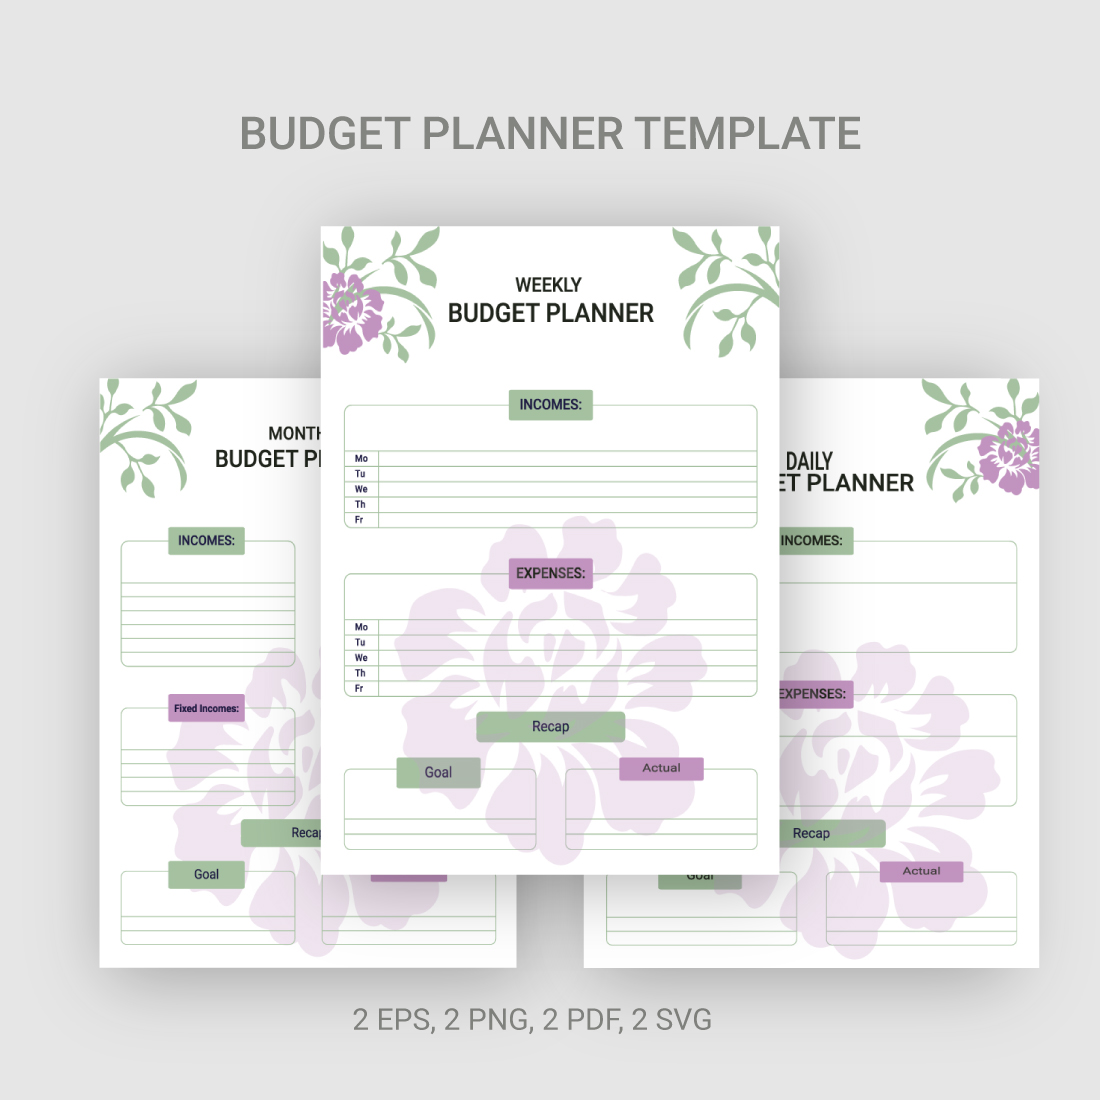 Budget Planner Collection Template cover image.